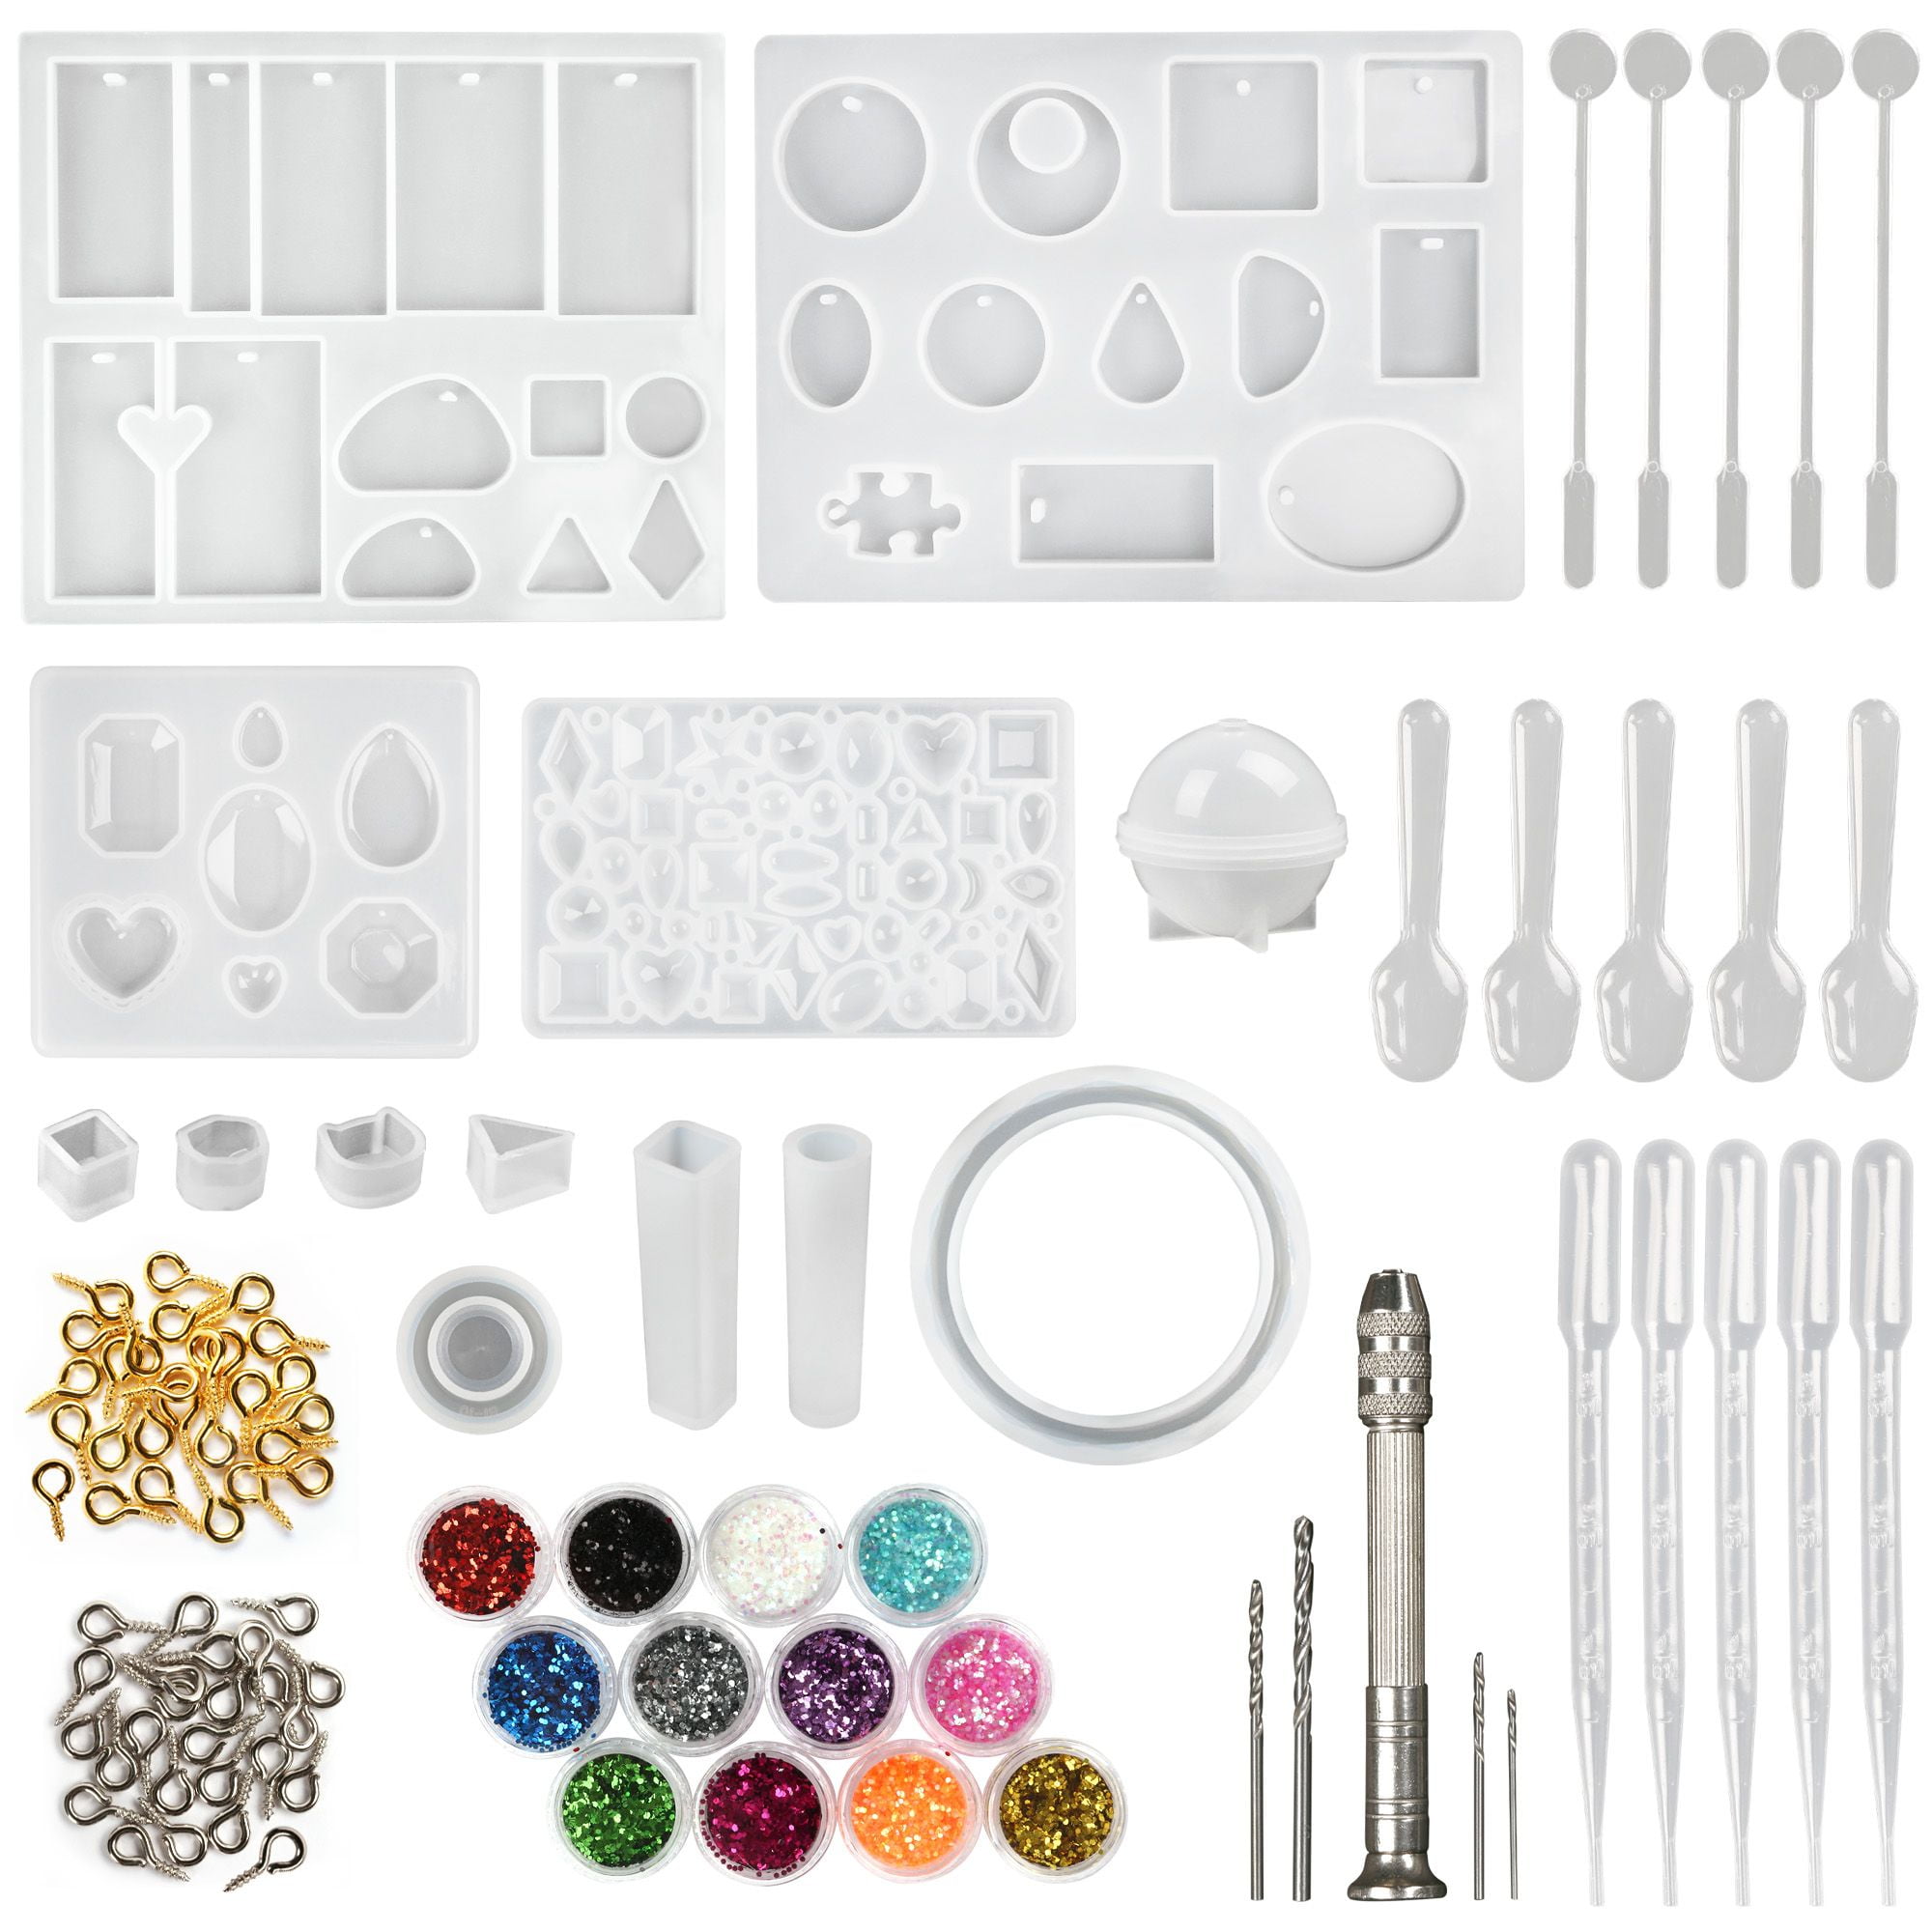 Resin Kit by Craft It Up! - Complete Starter Jewelry Making Resin Kit for  Beginners